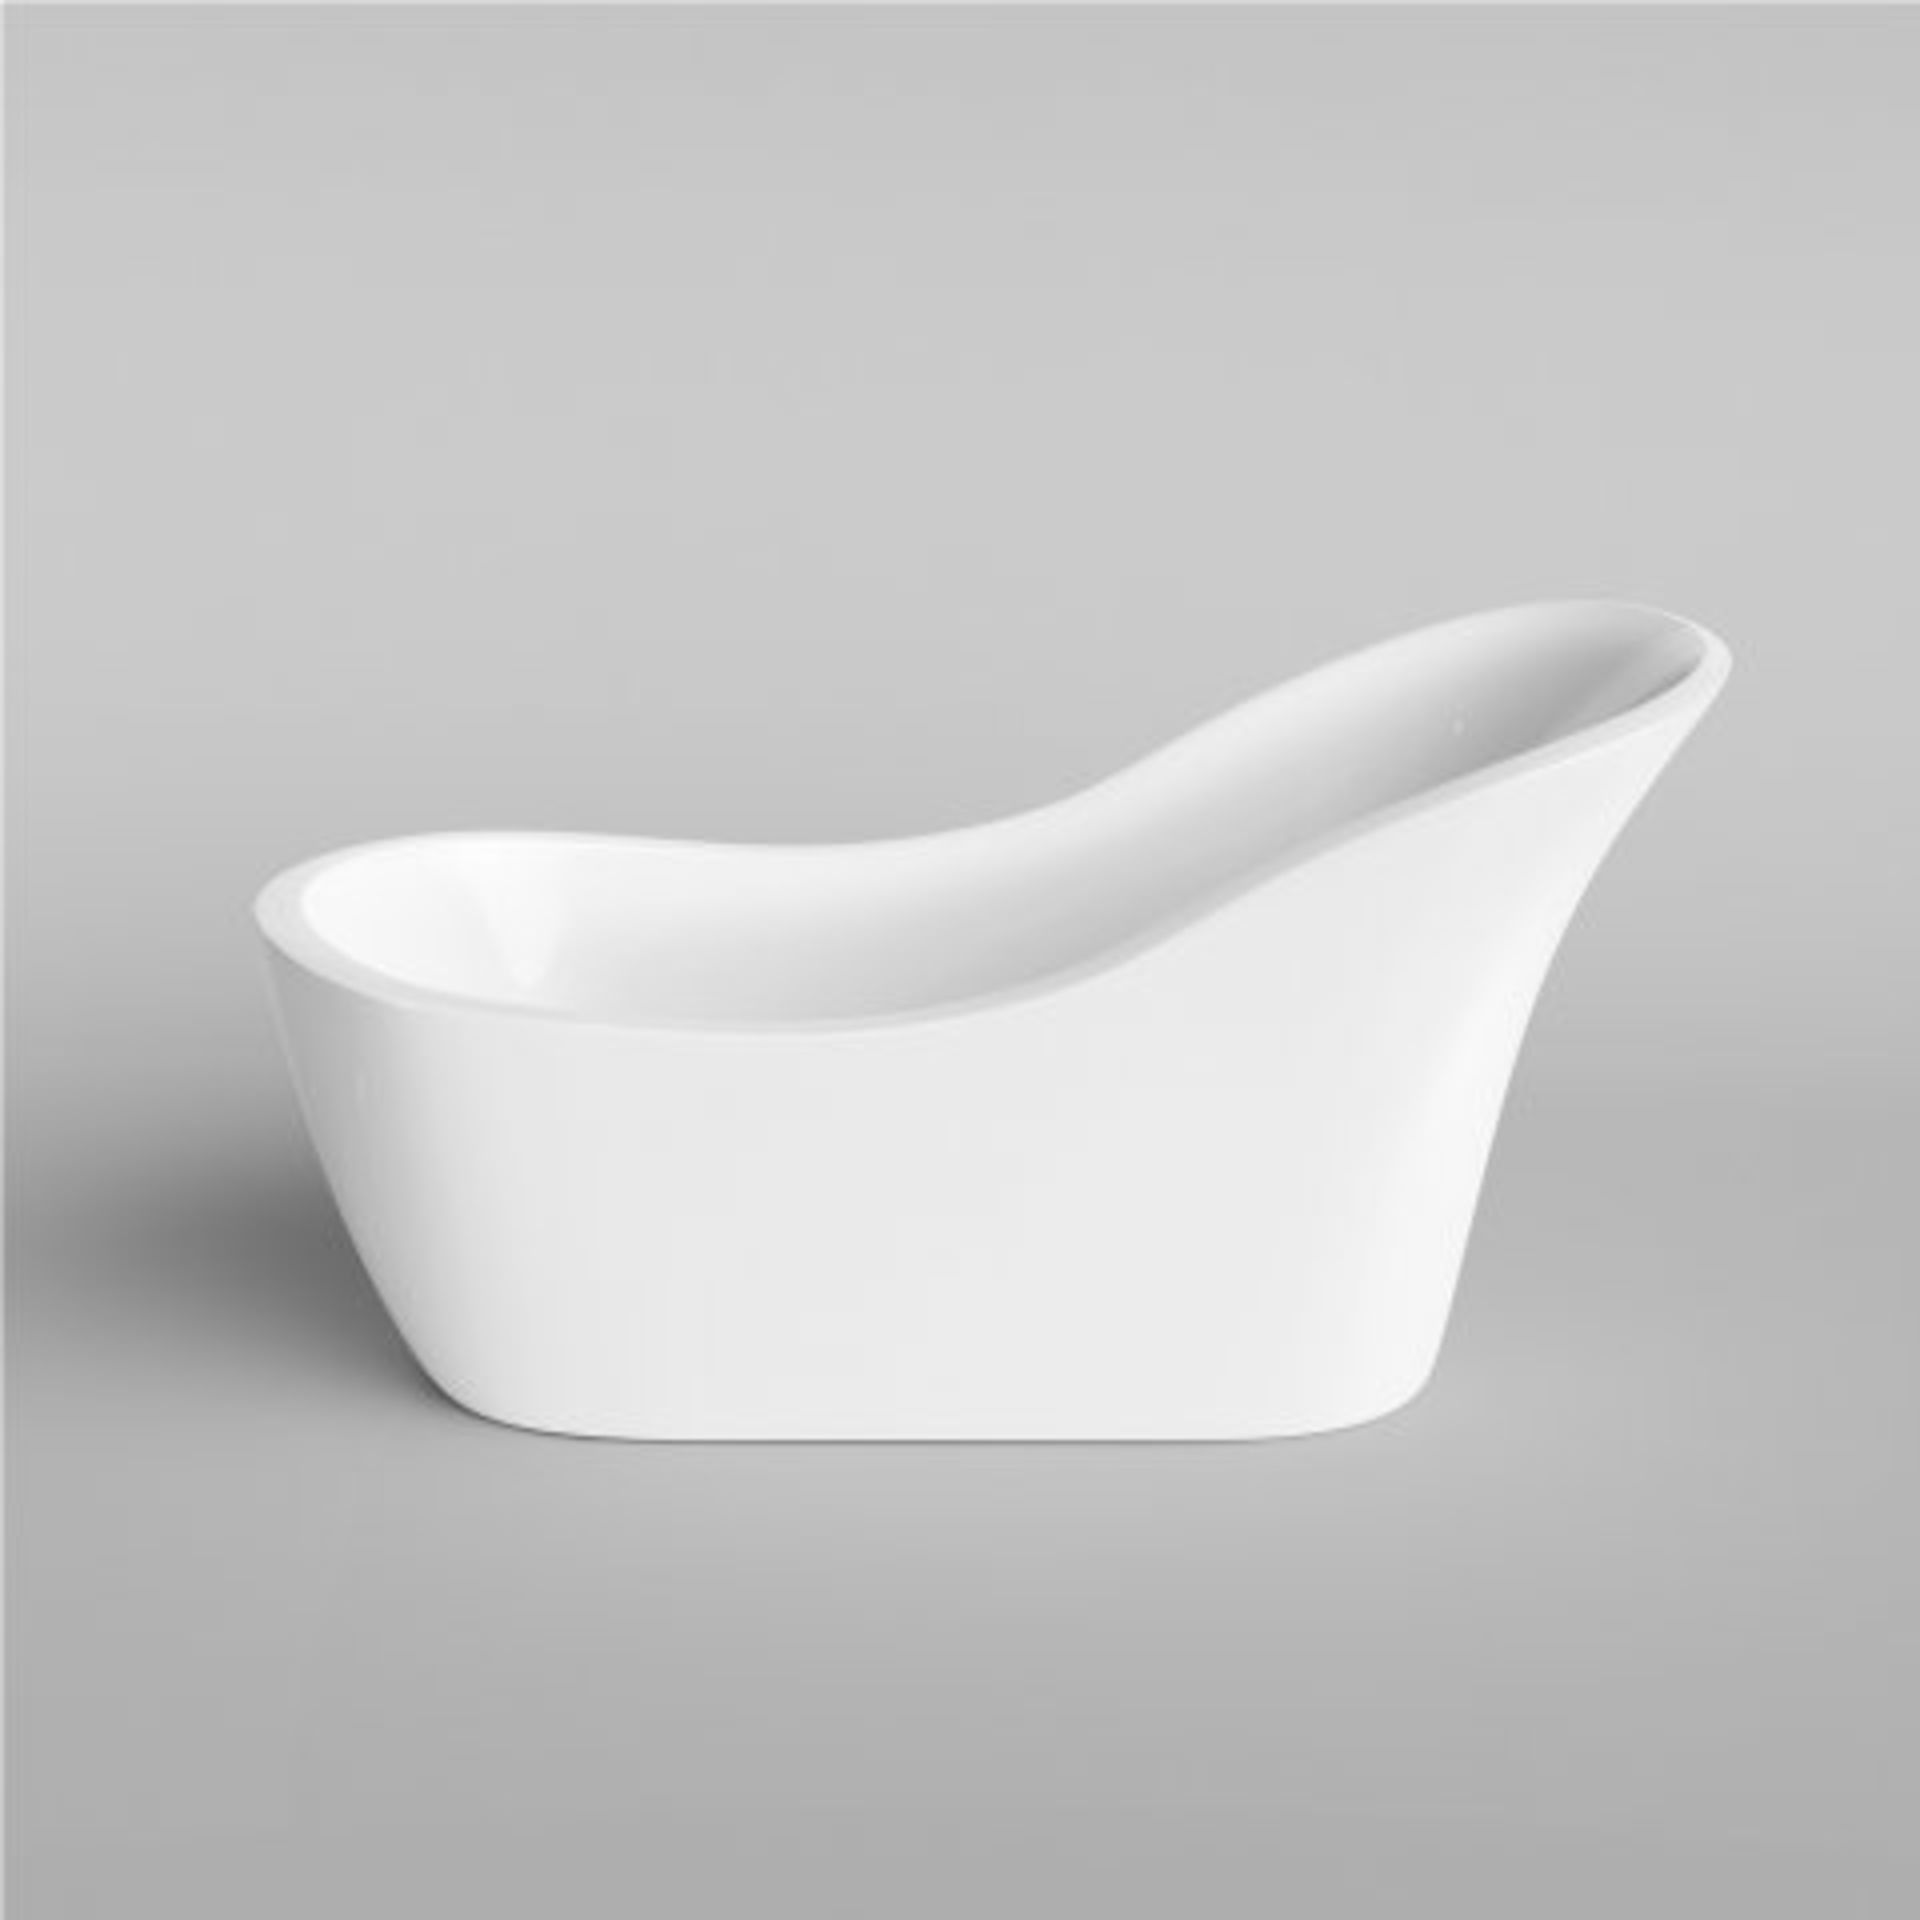 1730x725mm Evelyn Freestanding Bath - Large. RRP £1,499. This gloss white free-standing bath e... - Image 2 of 2